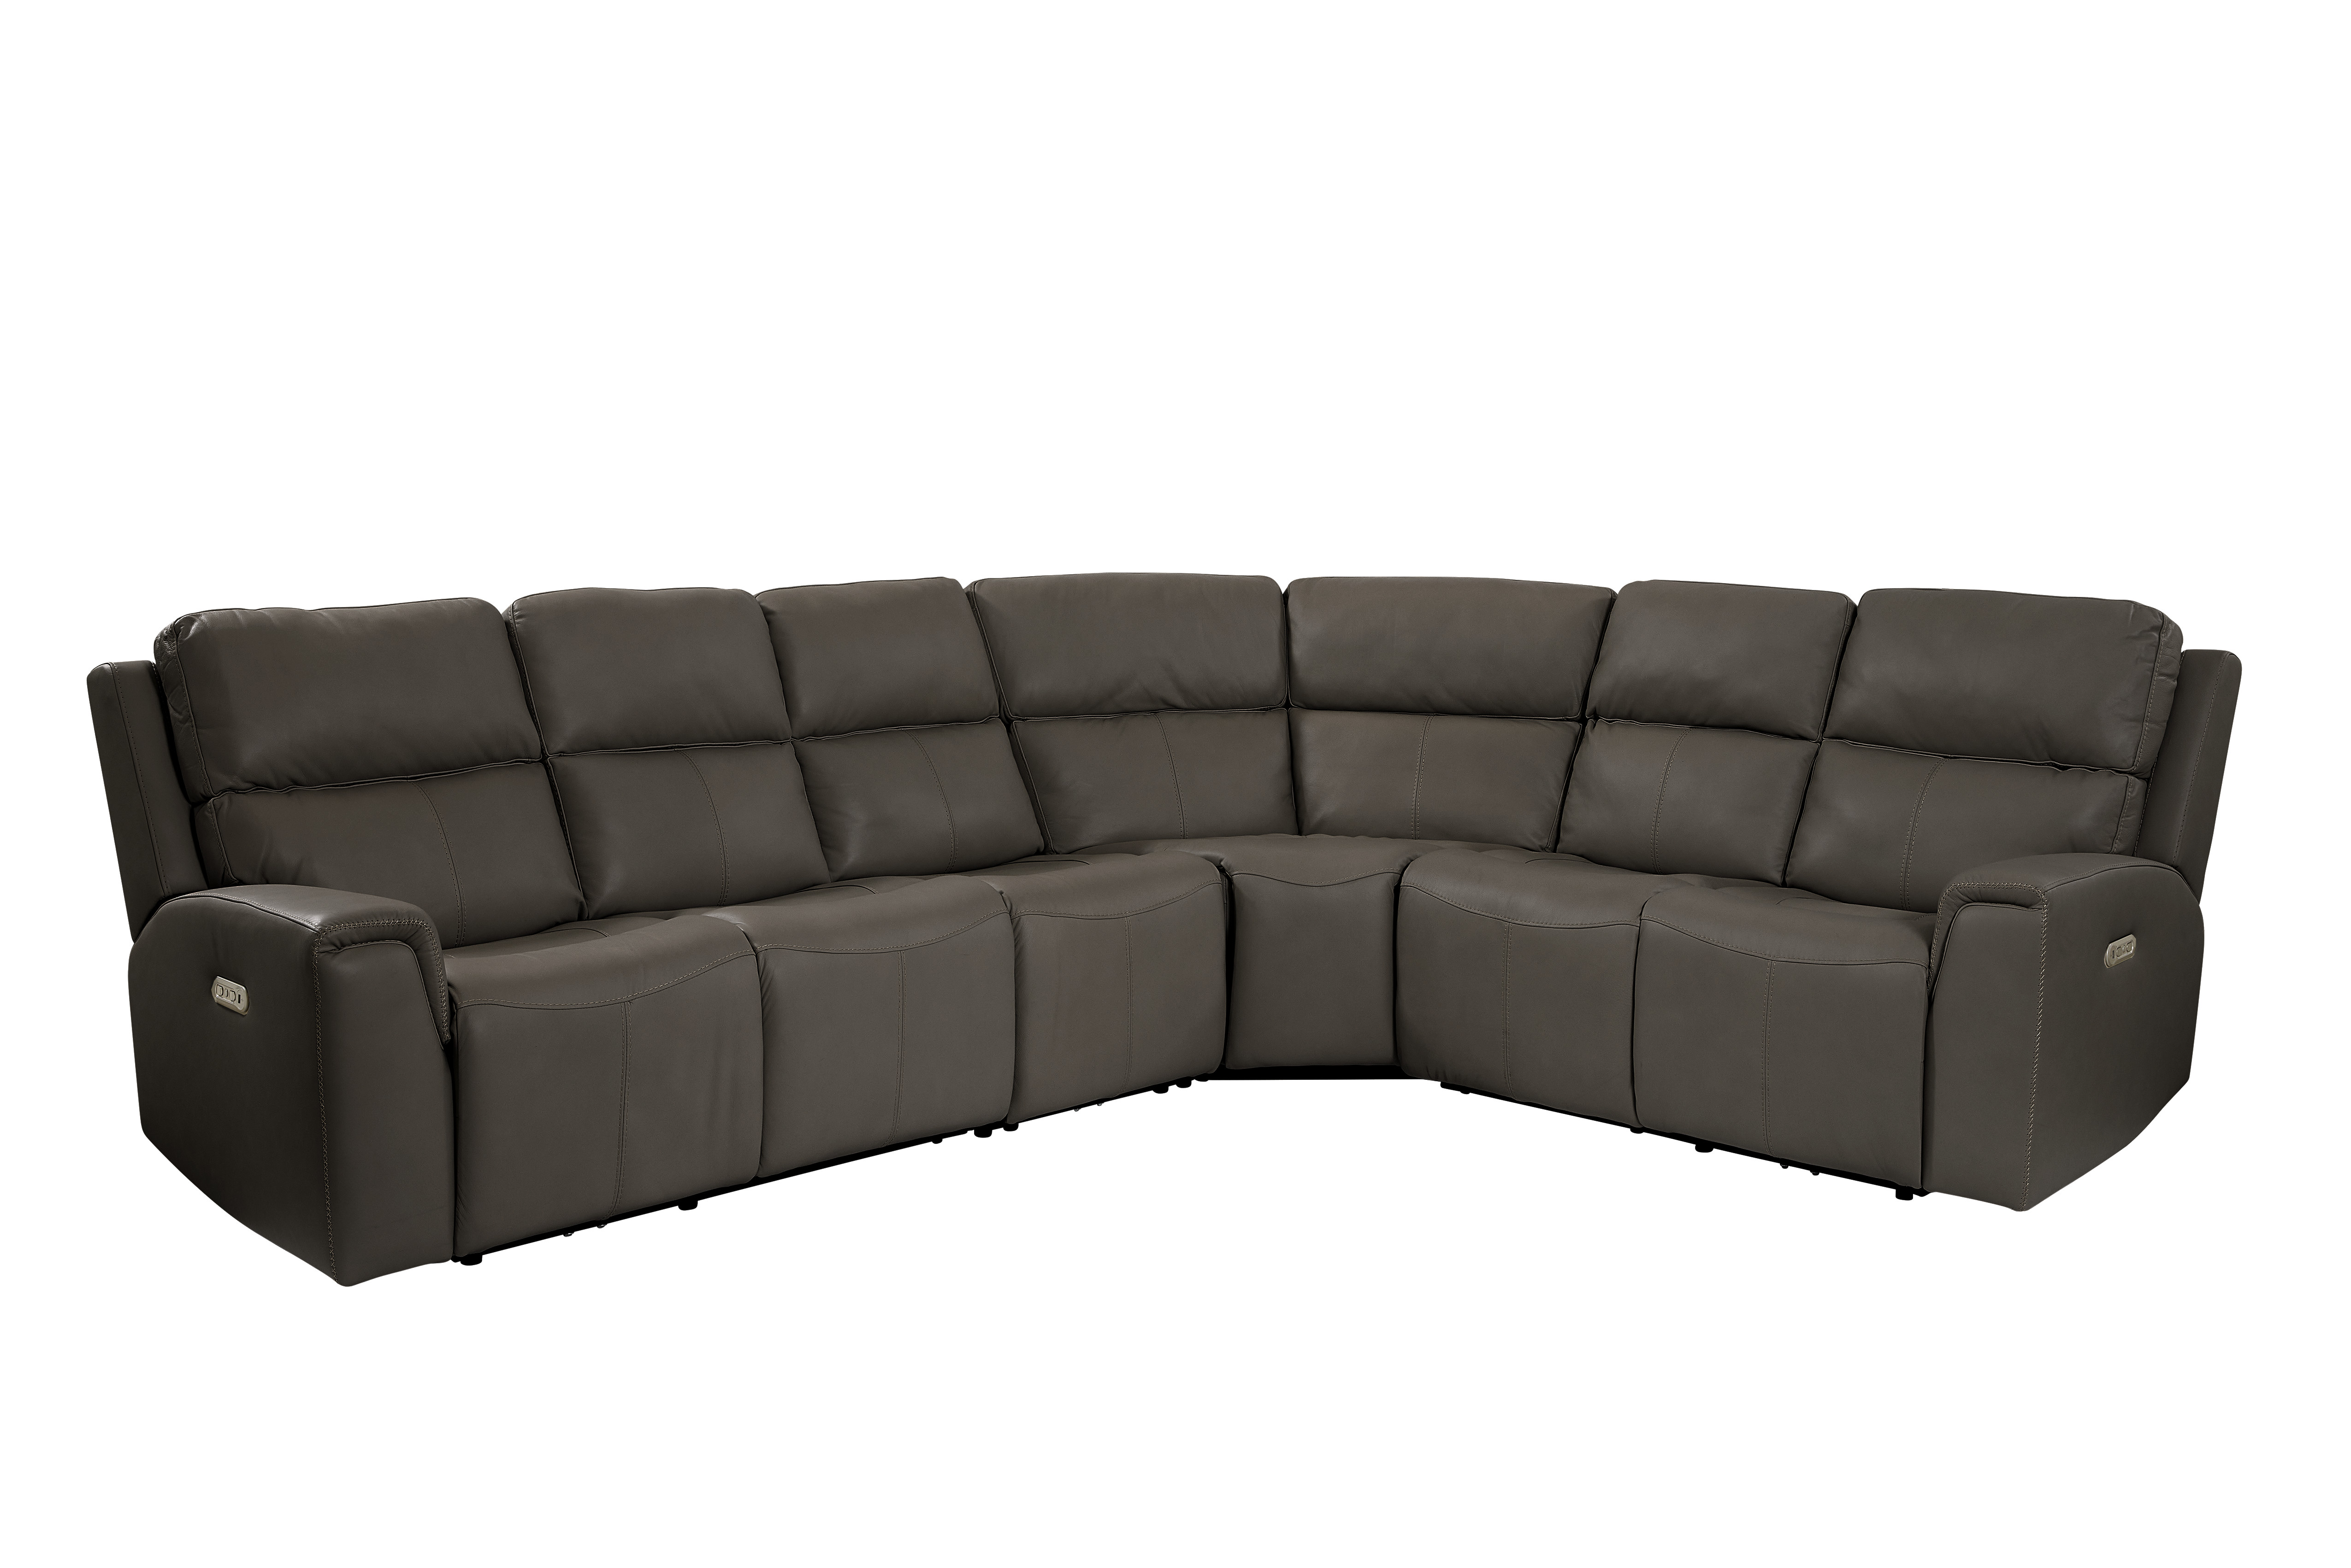 Flexsteel Jarvis Power Reclining Sectional with Power Headrest